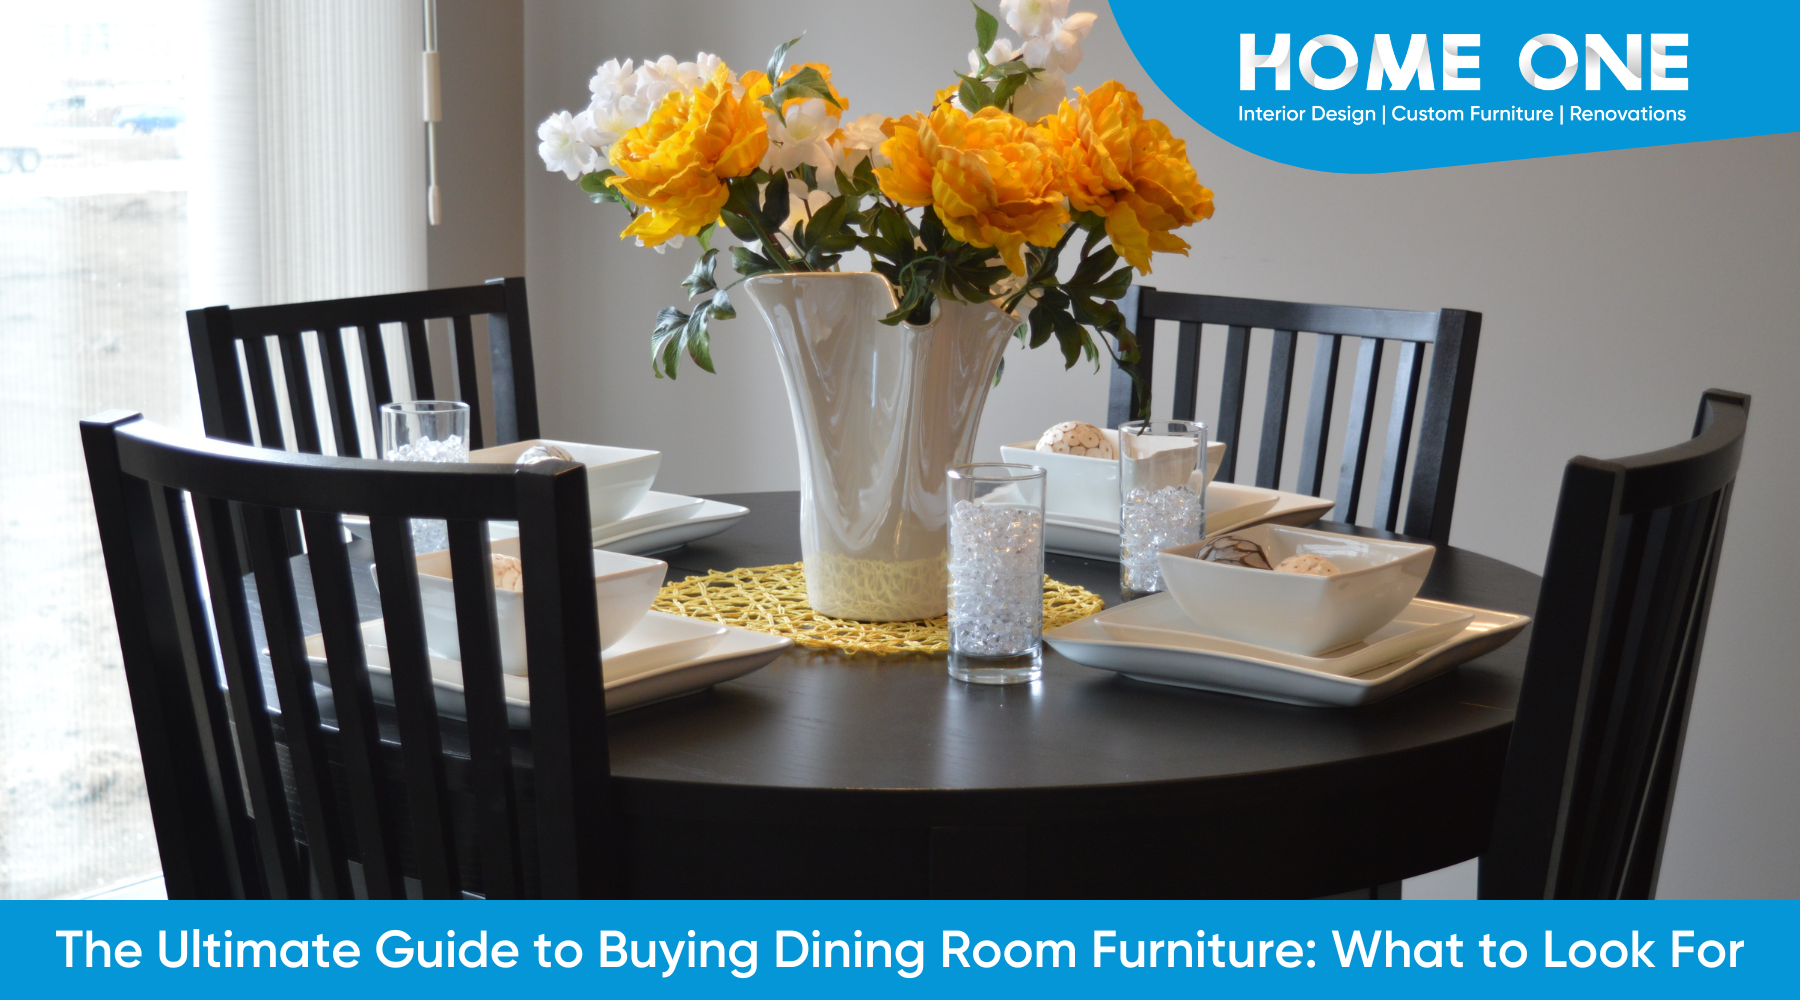 The Ultimate Guide to Buying Dining Room Furniture: What to Look For